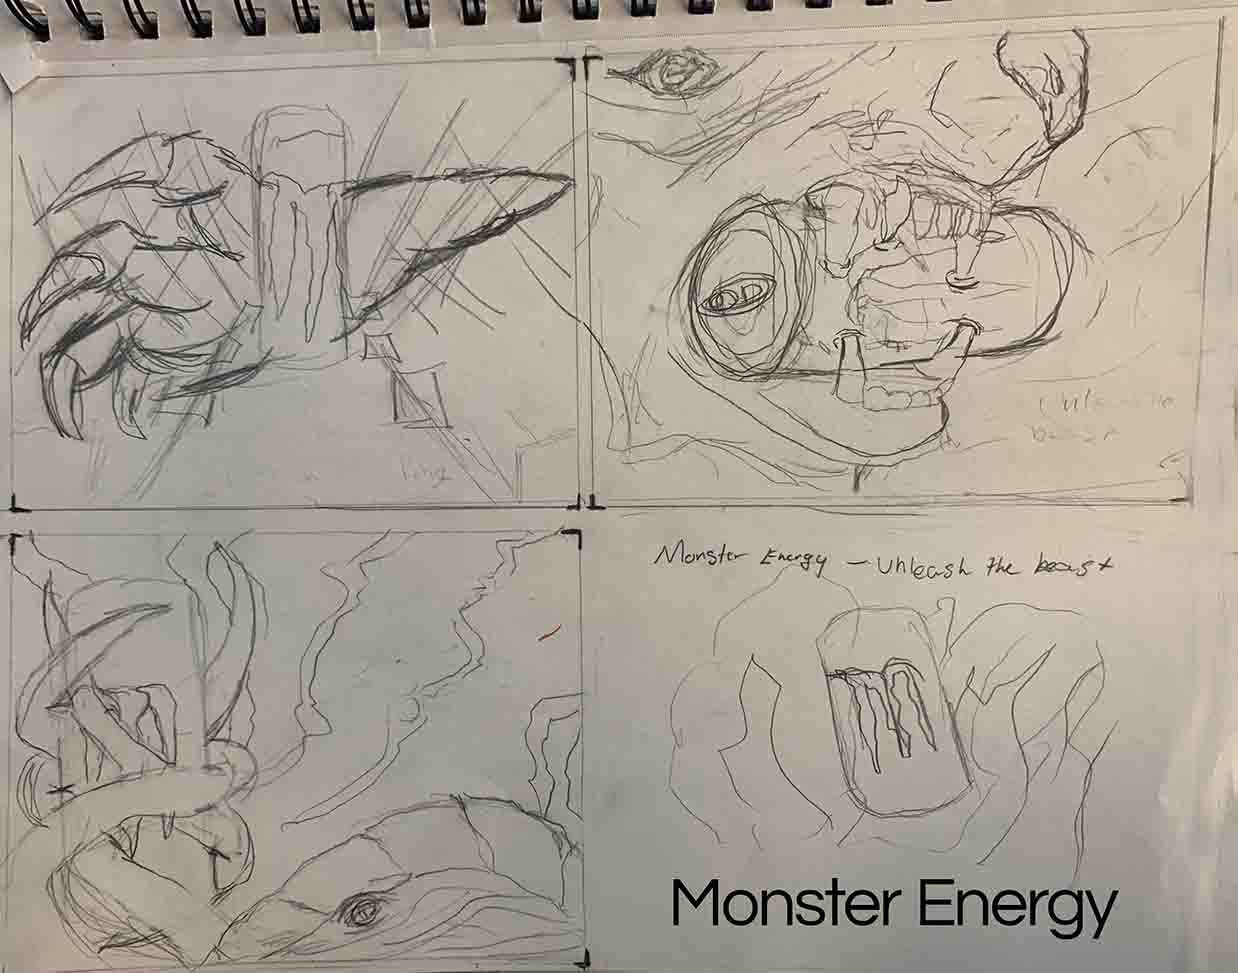 thumbnails for 2-page monster energy ad